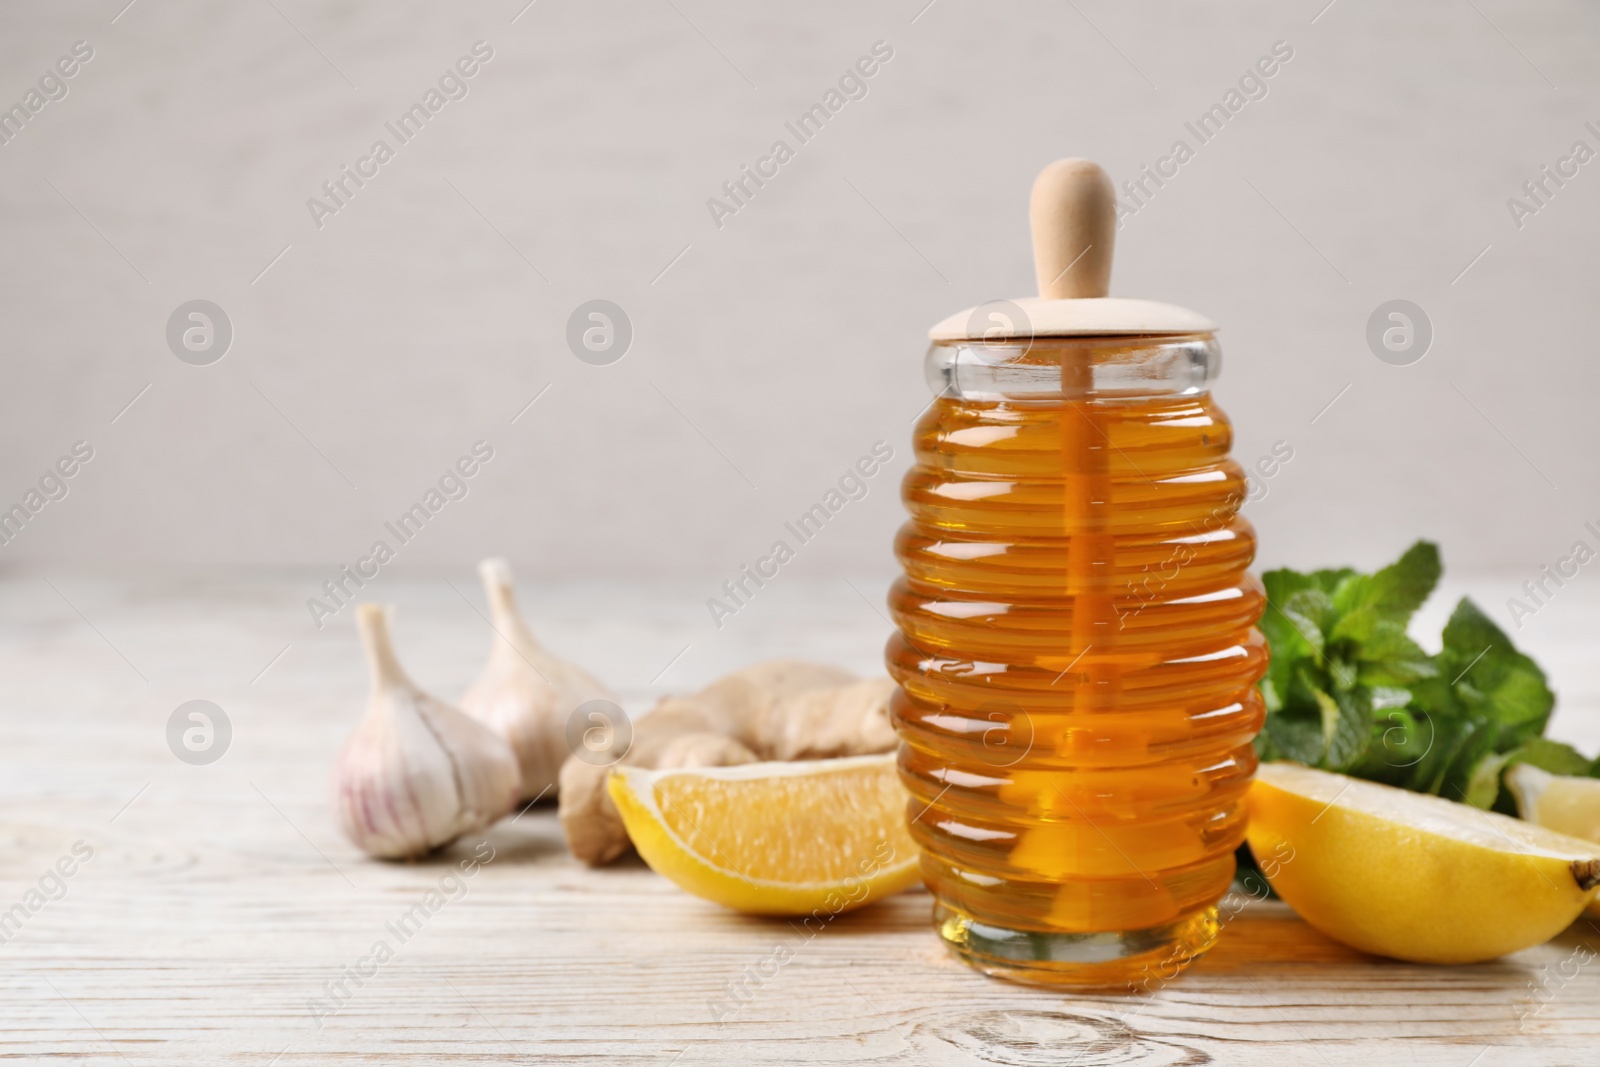 Photo of Jar of honey, ginger, garlic, mint and lemon on wooden table, space for text. Cough remedies